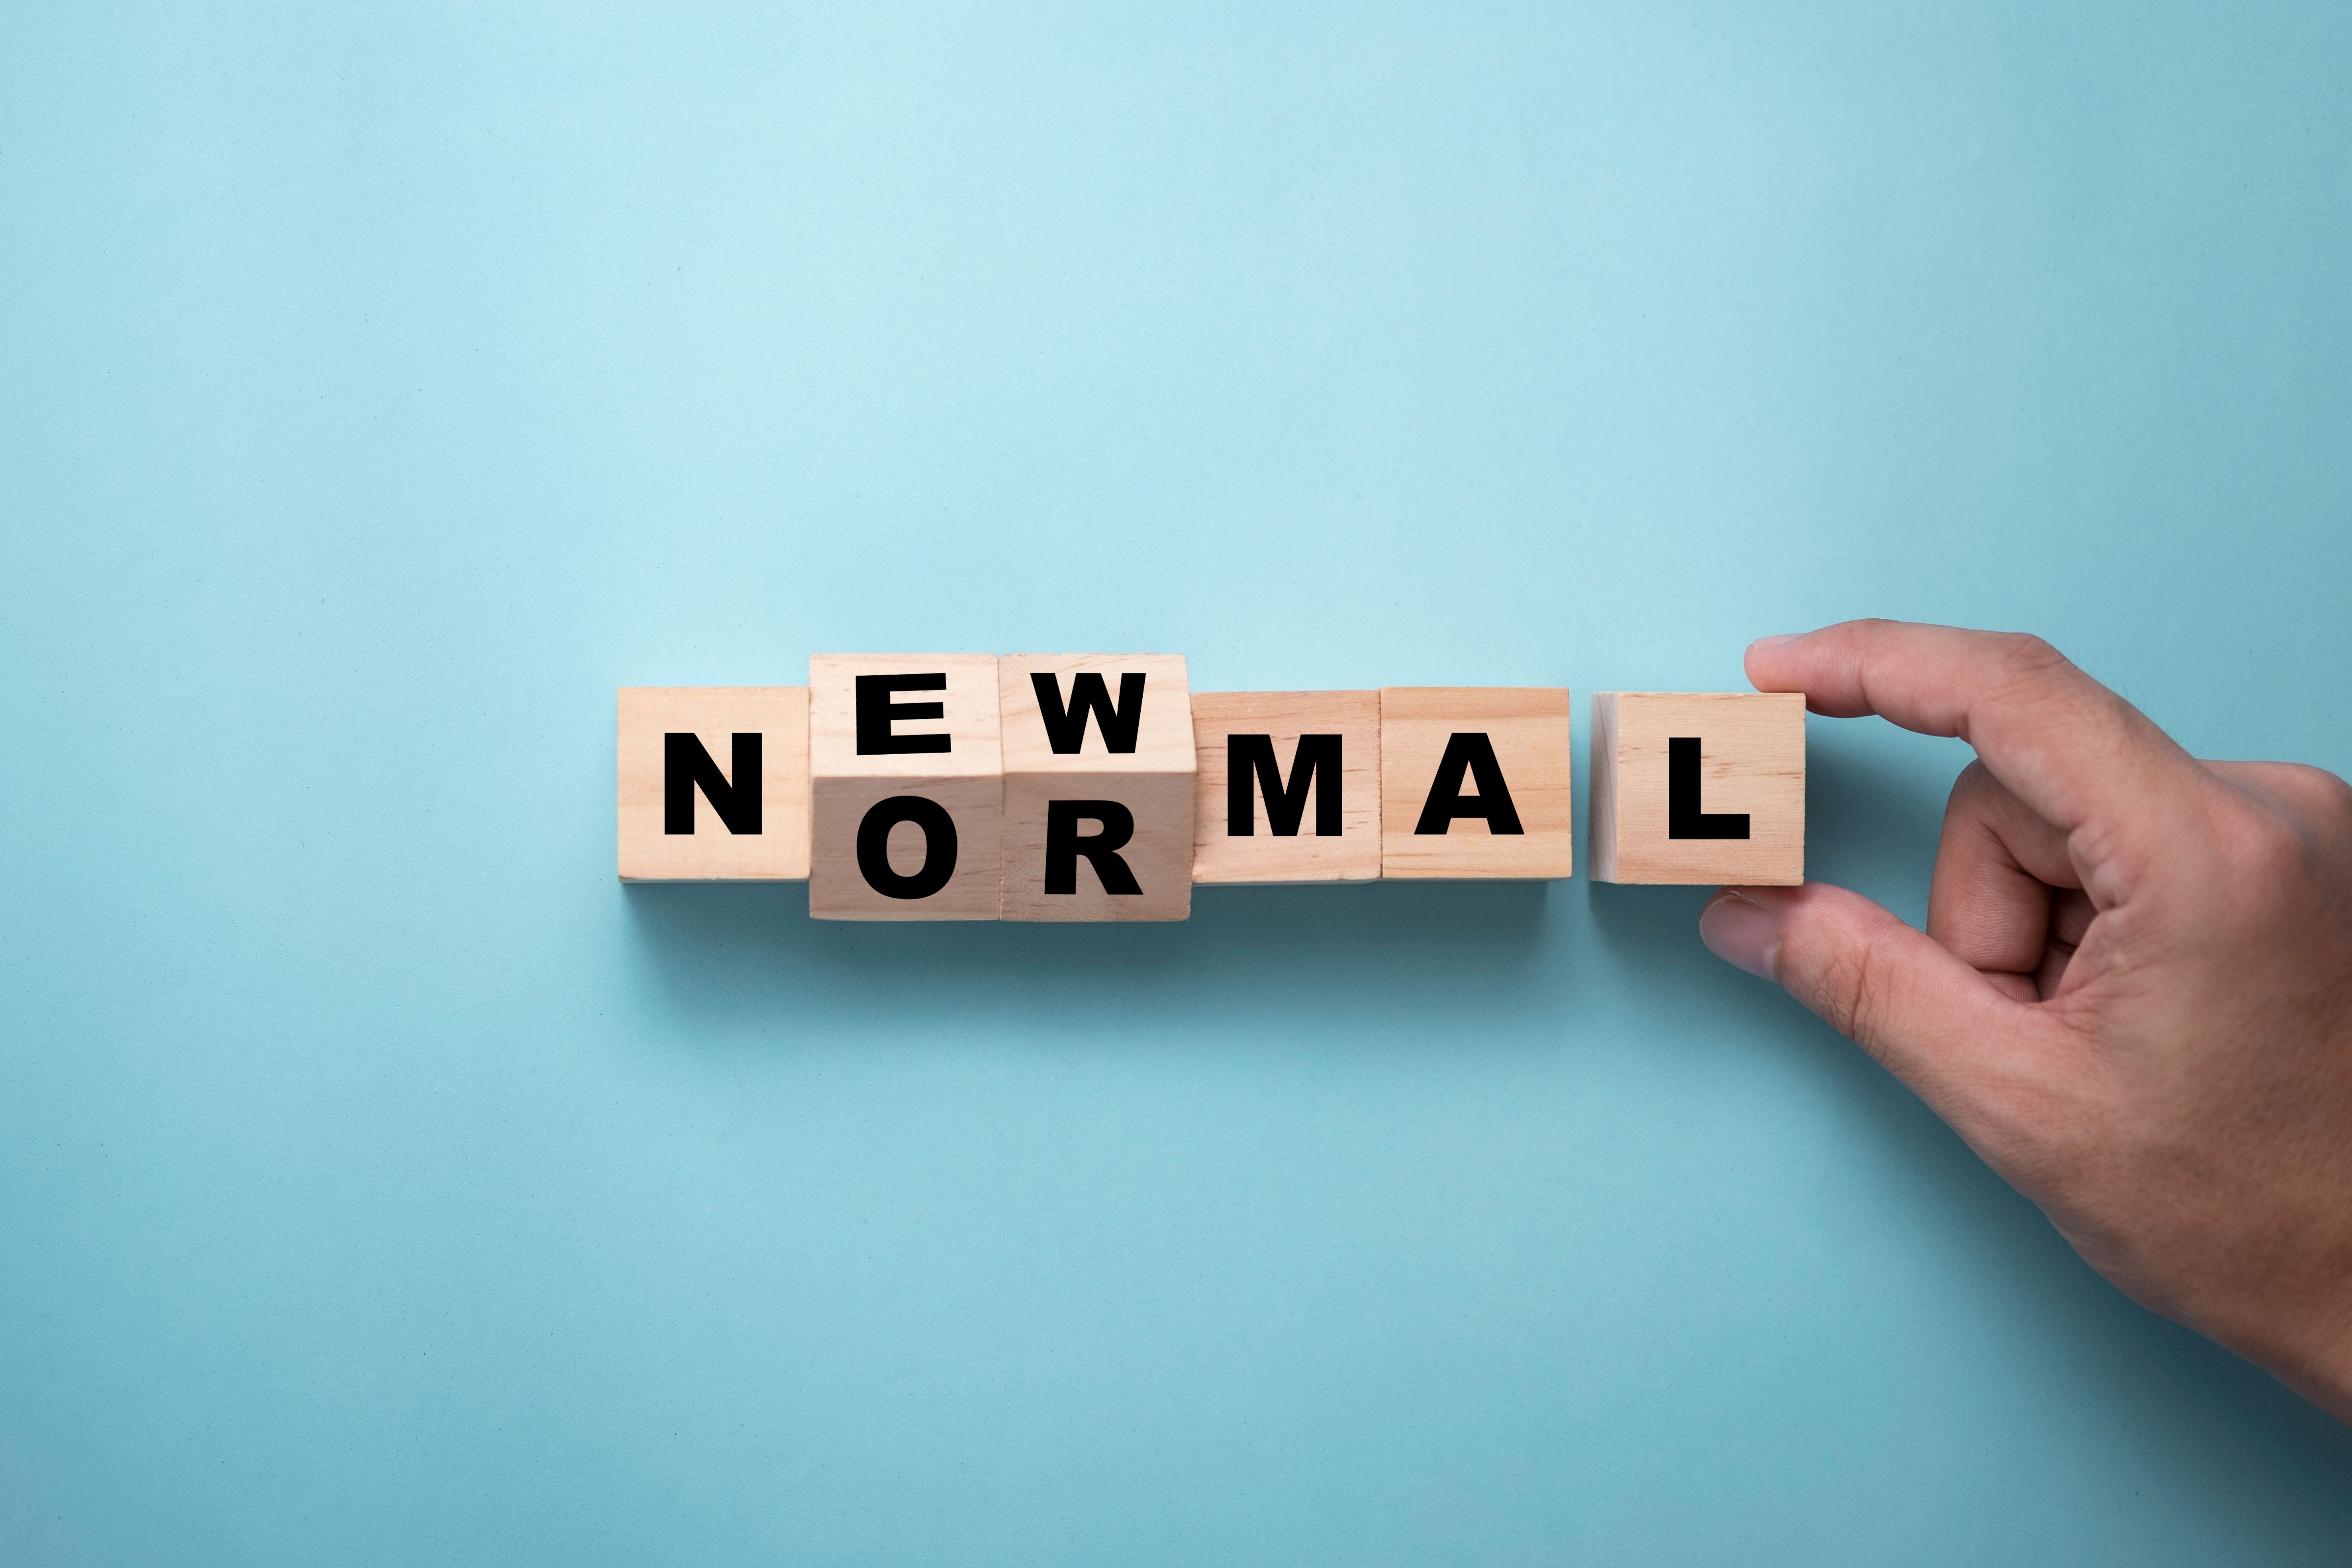 How can organisations survive and thrive in the new normal?